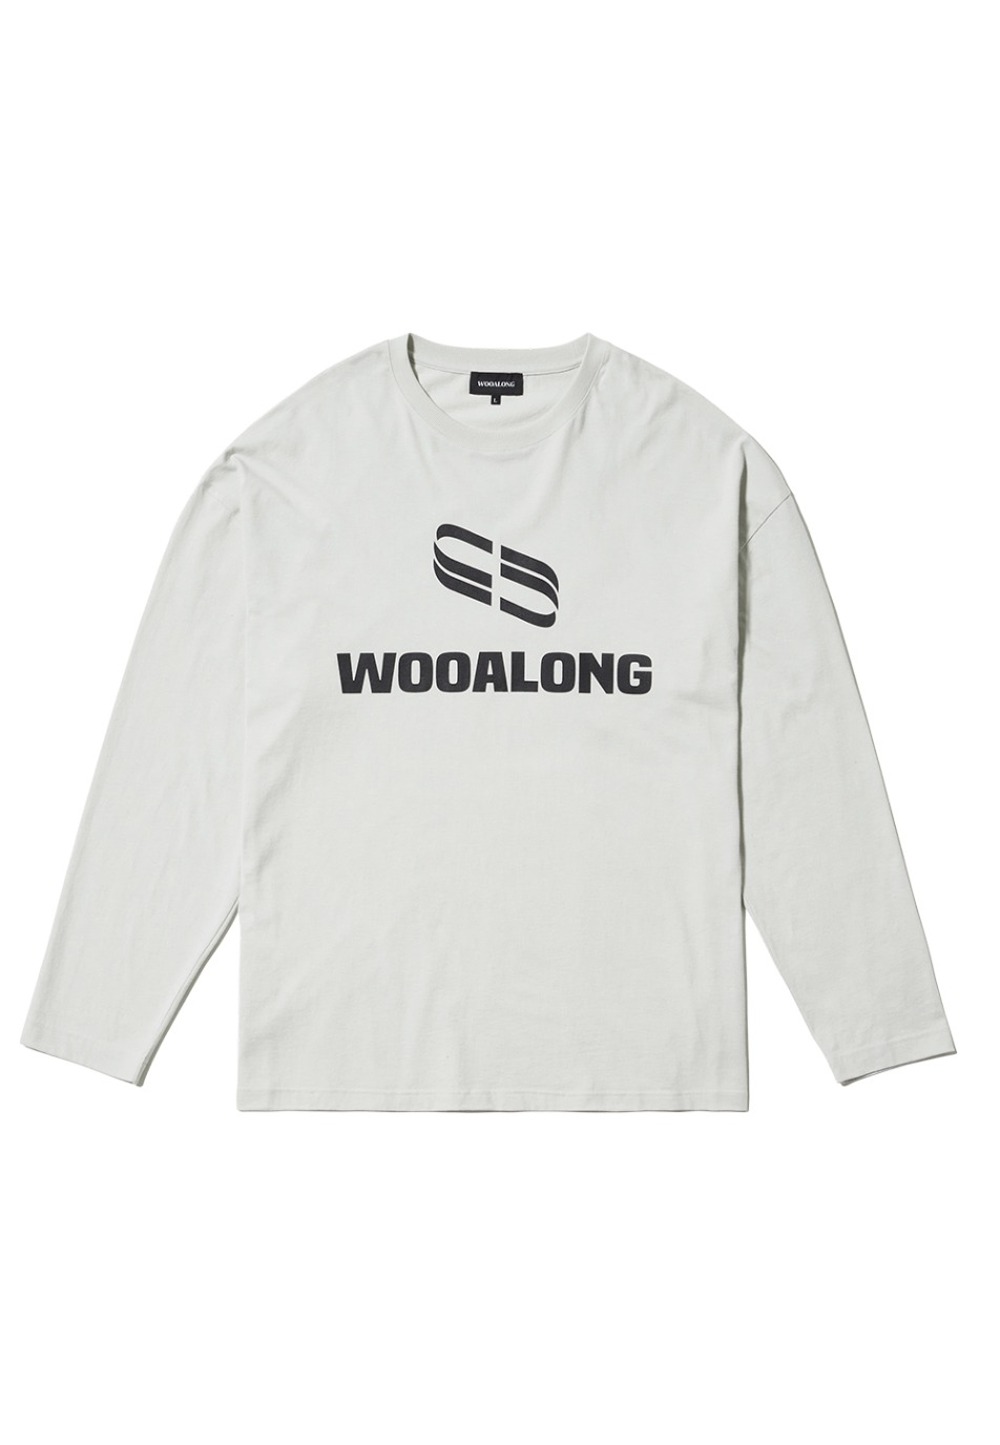 Spin logo over fit long sleeve - LIGHT GREY